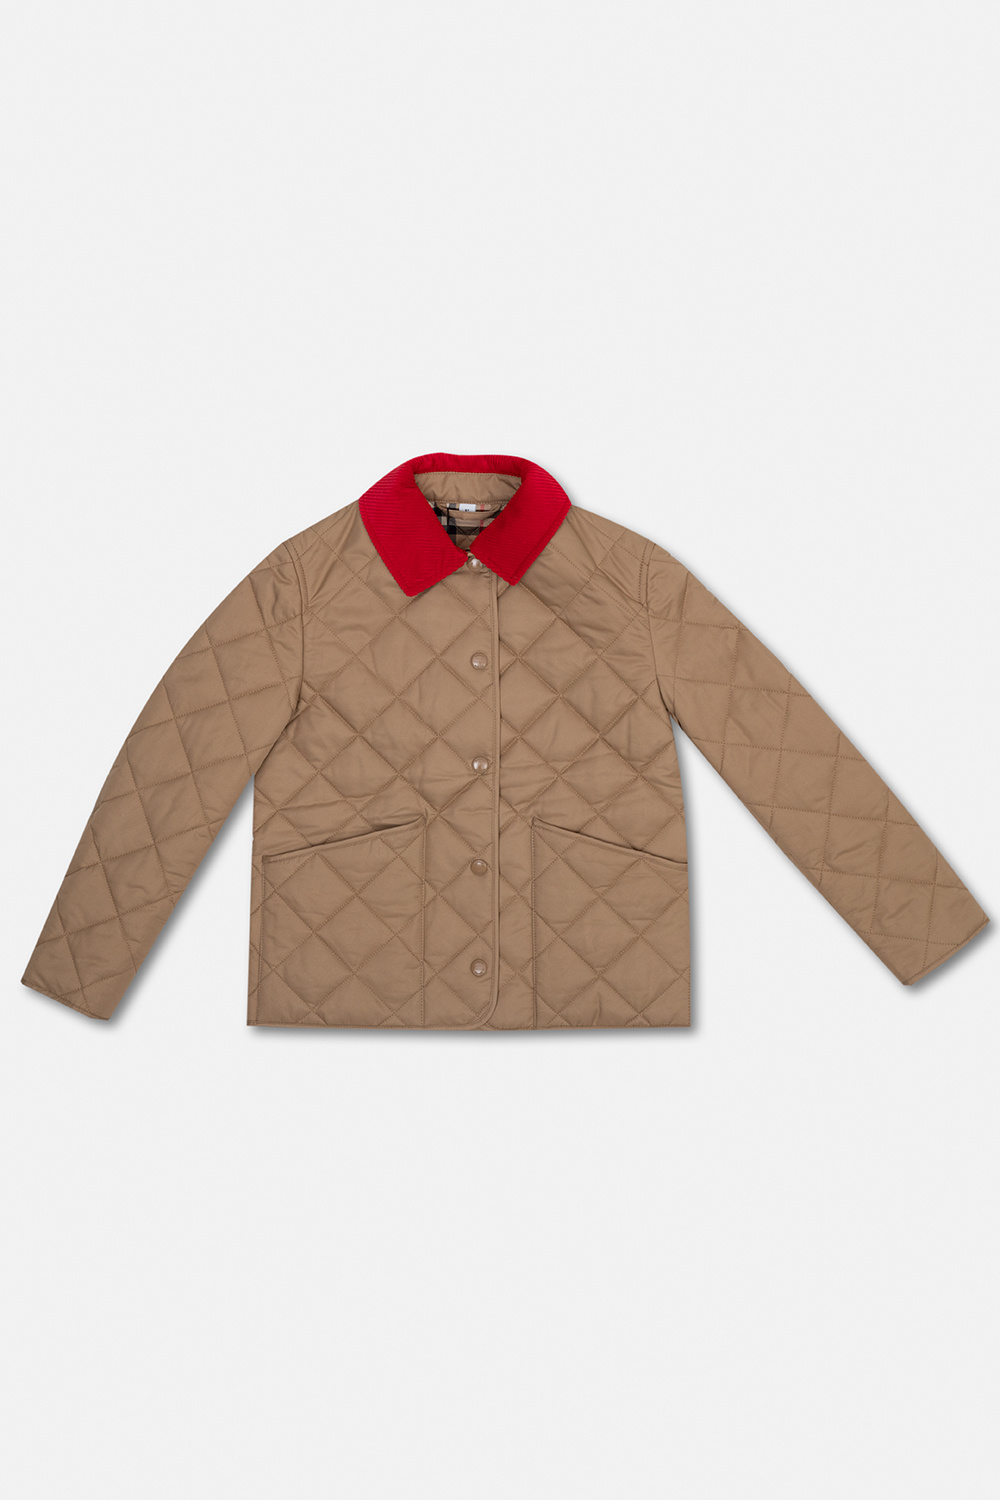 Burberry Kids ‘Daley’ quilted warmer